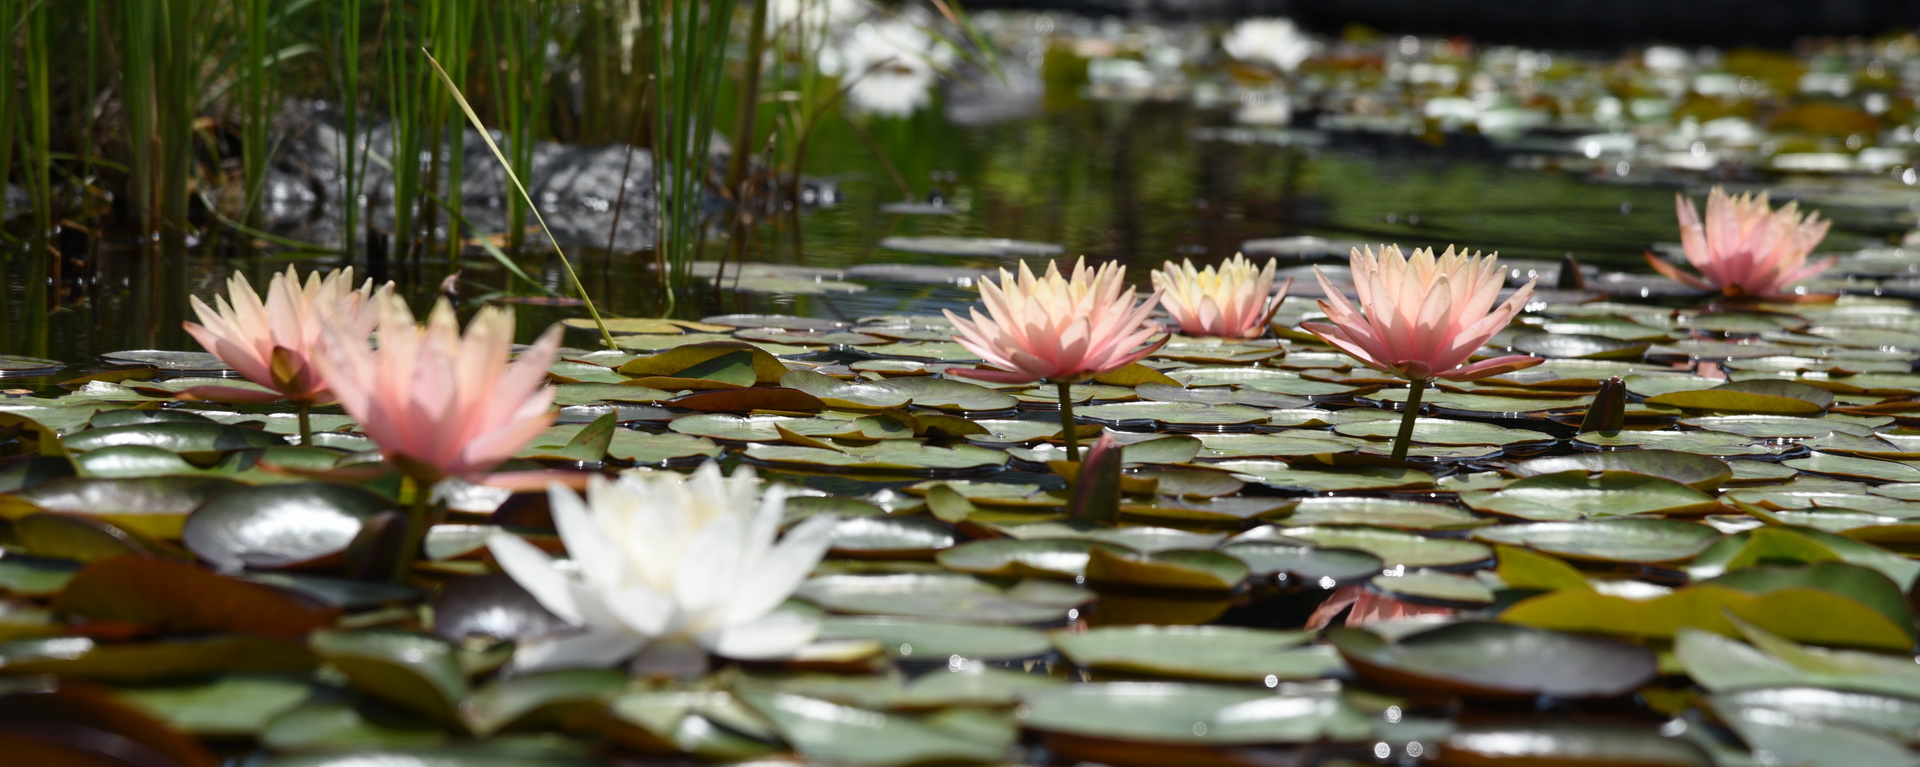 lily pond flowers